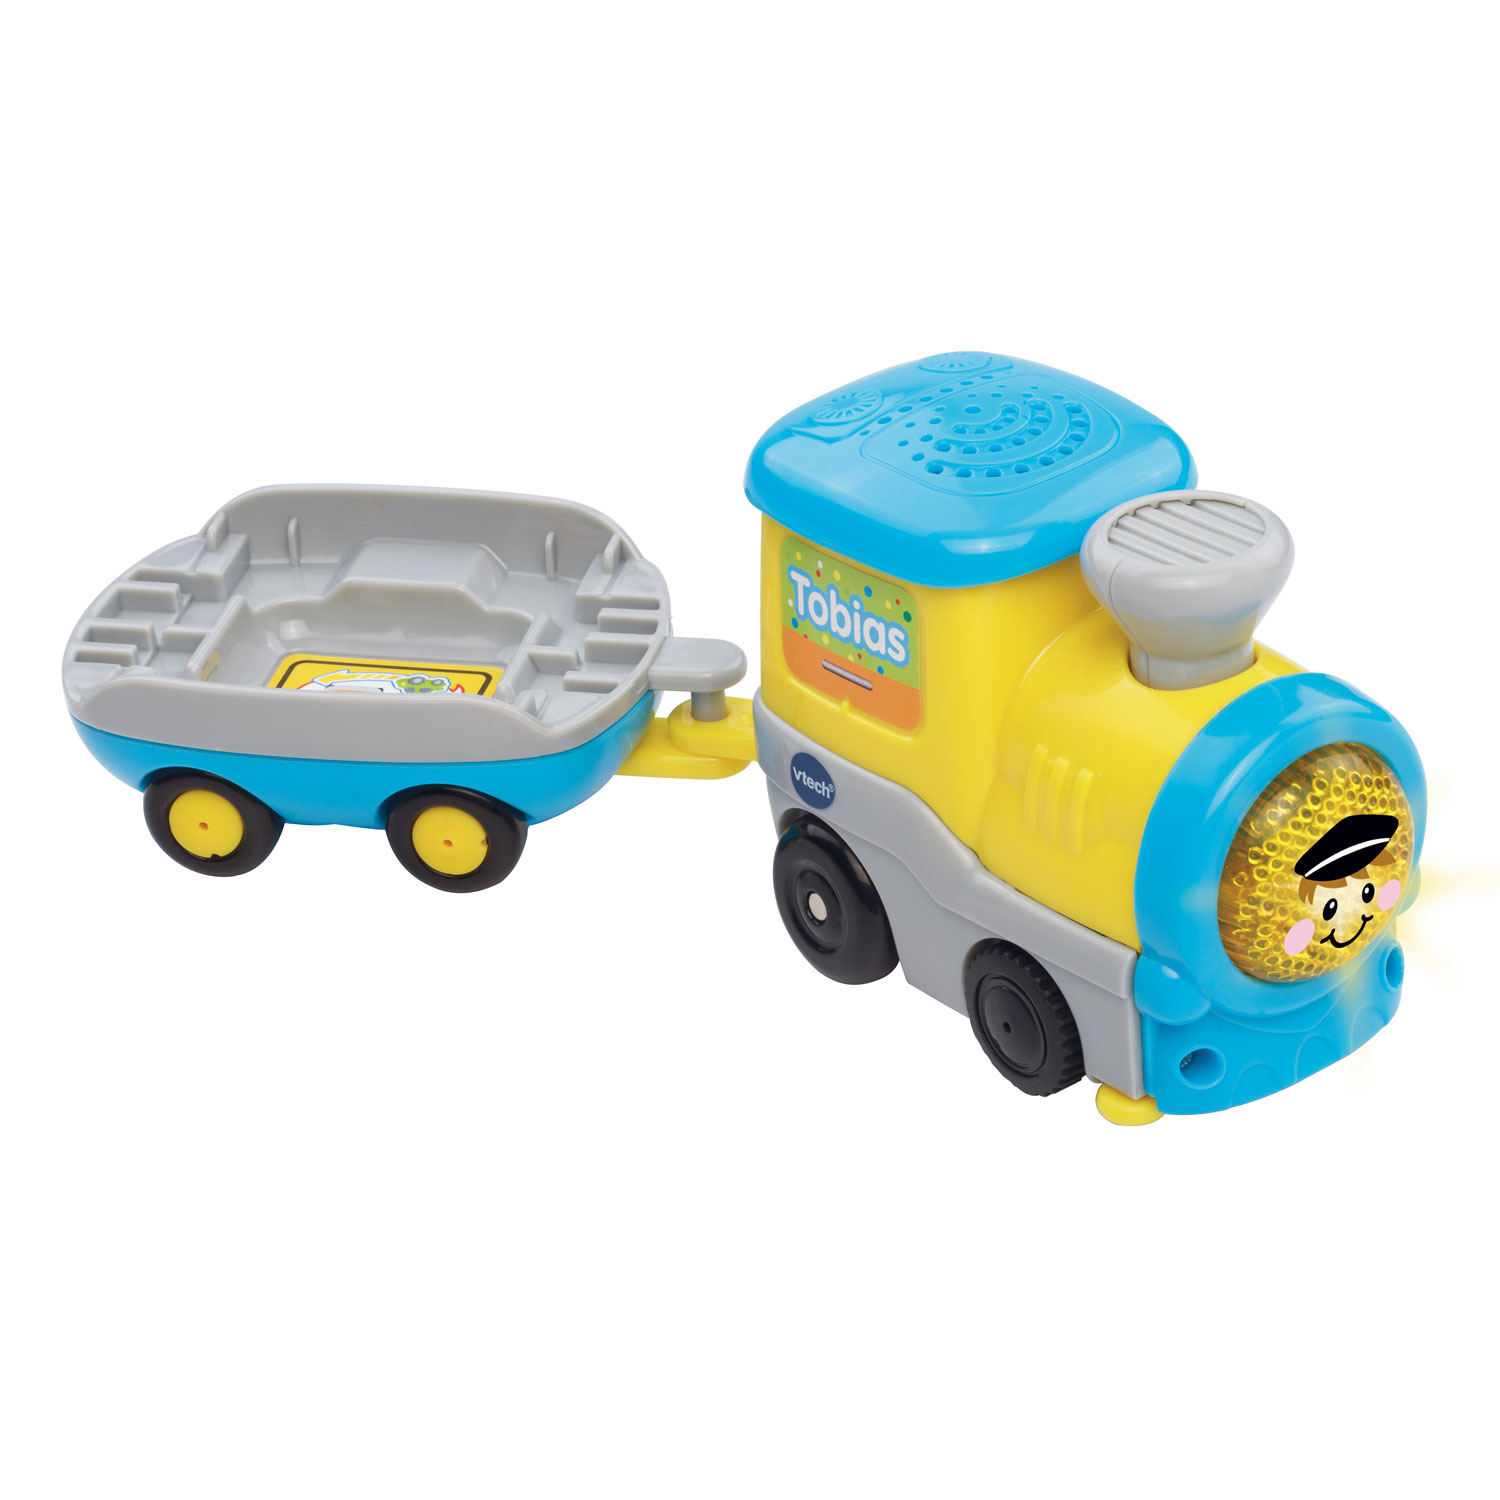 beven speler stad VTech Taka Cars-Tobias train with Trailer | Thimble Toys